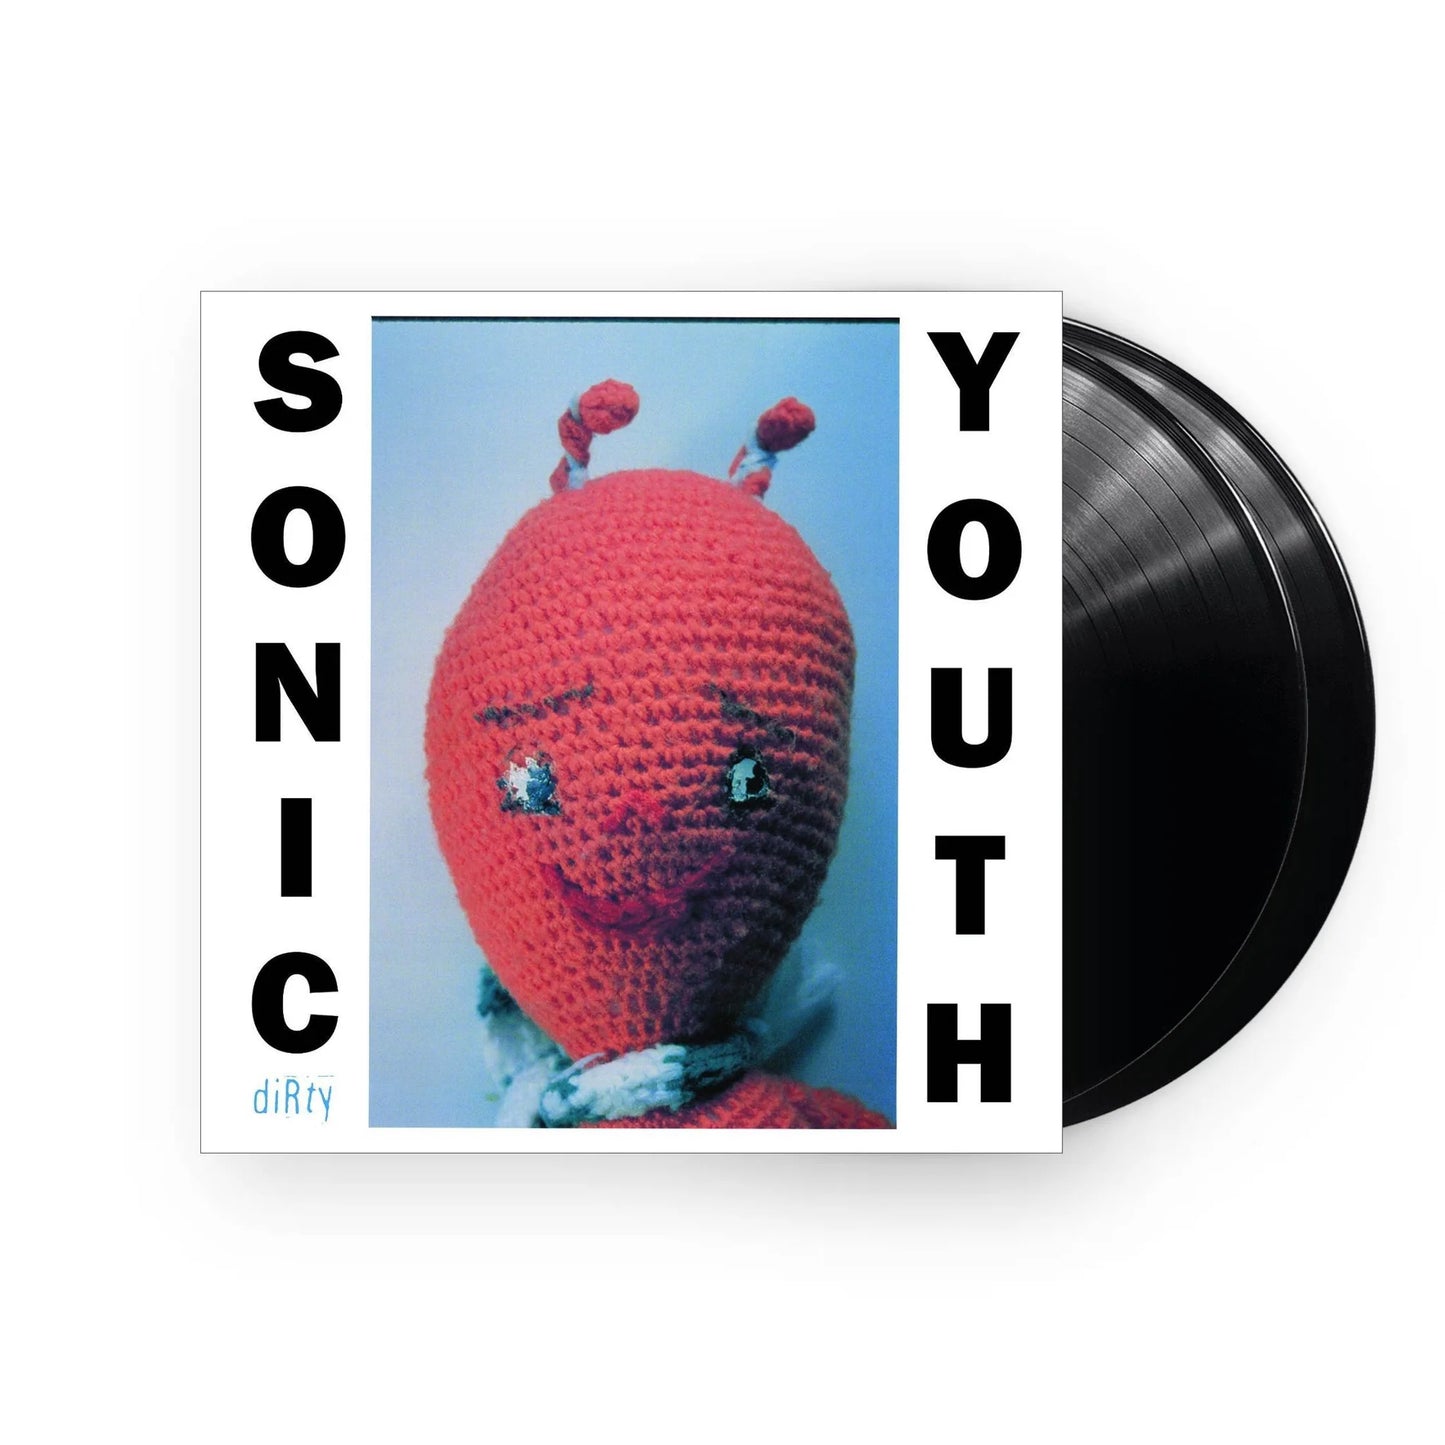 Sonic Youth - Dirty (Double Black Vinyl)